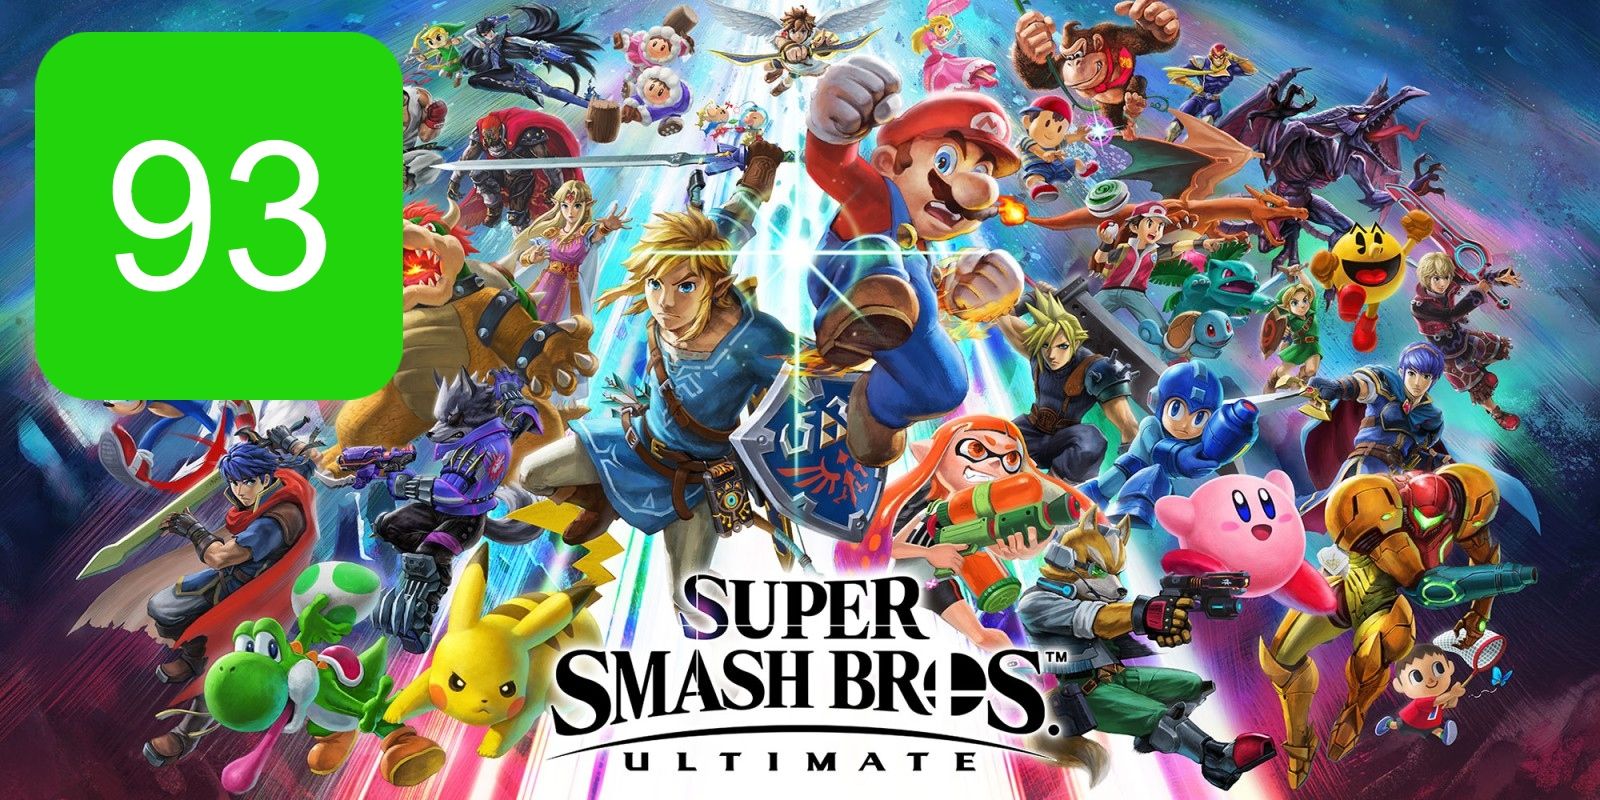 The Switch Metascore for Super Smash Ultimate featuring the character roster